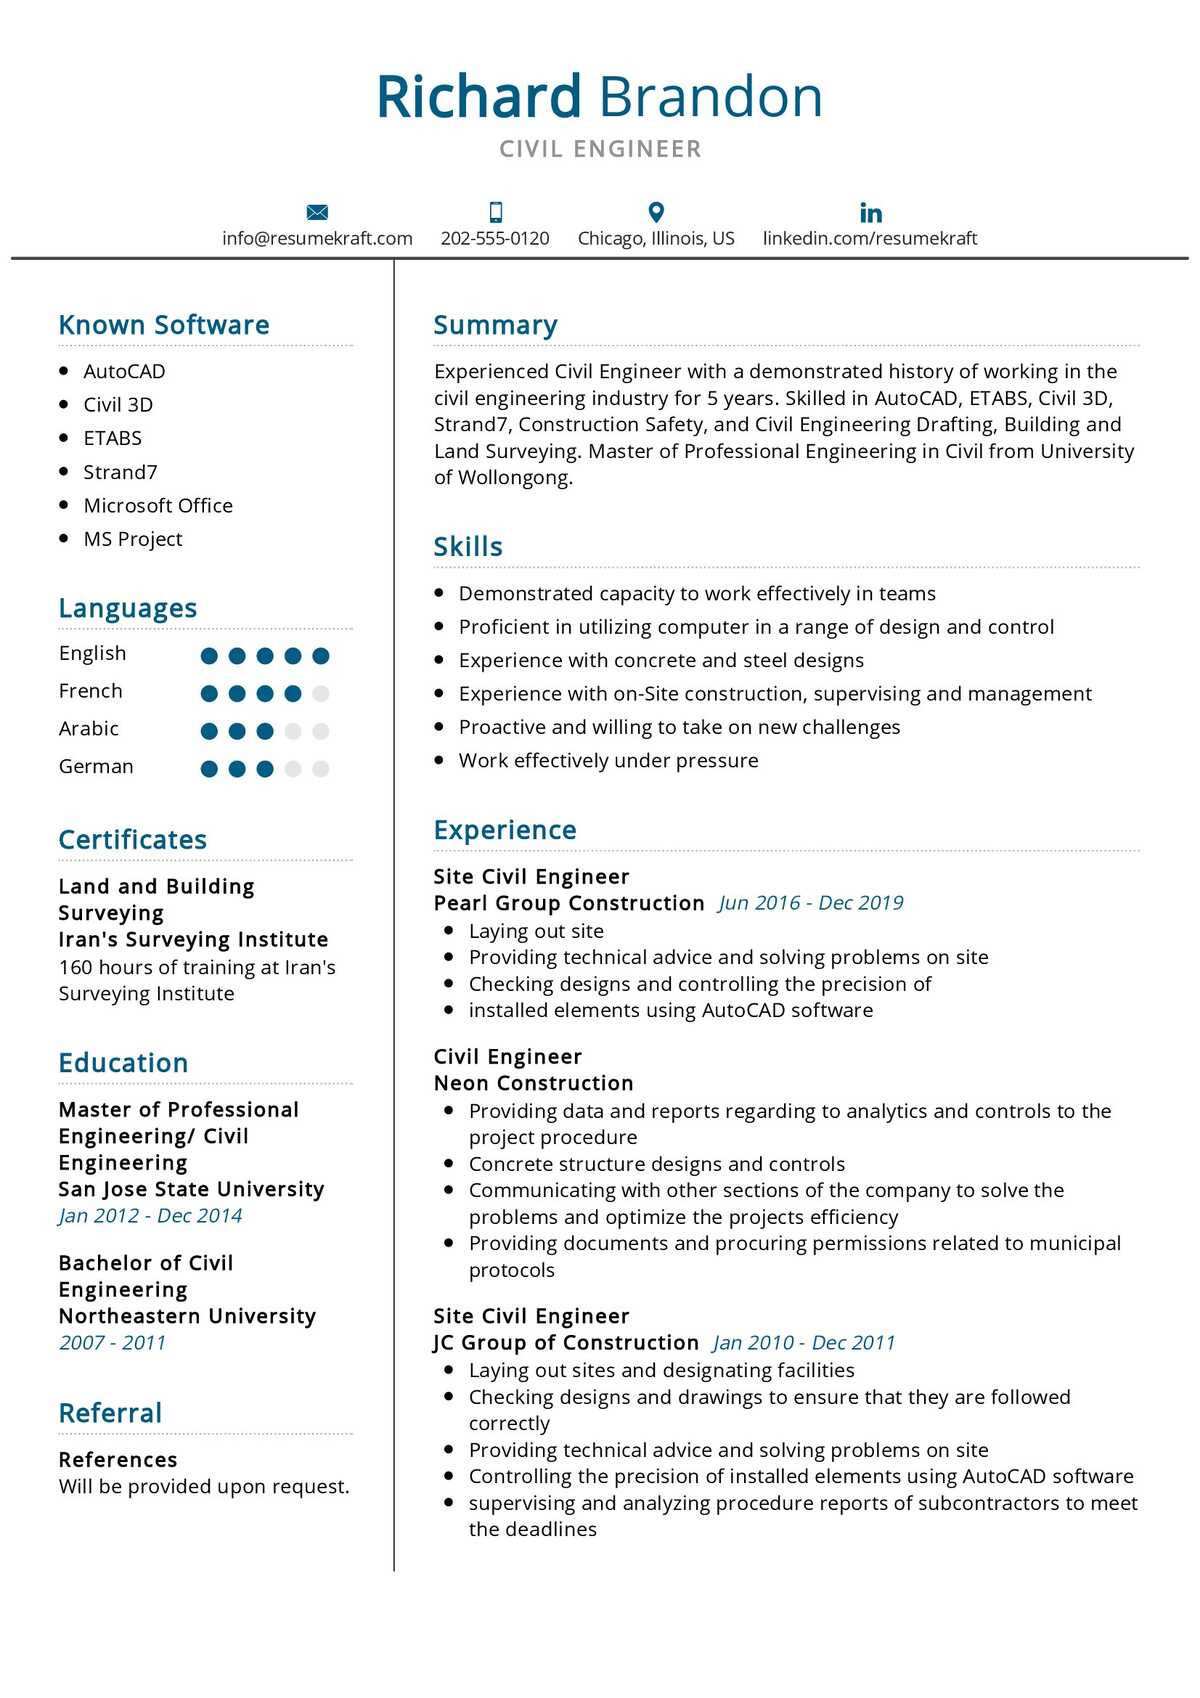 Professional Engineering Resume Samples for Freshers Civil Engineer Resume Example 2021 Writing Guide & Tips …